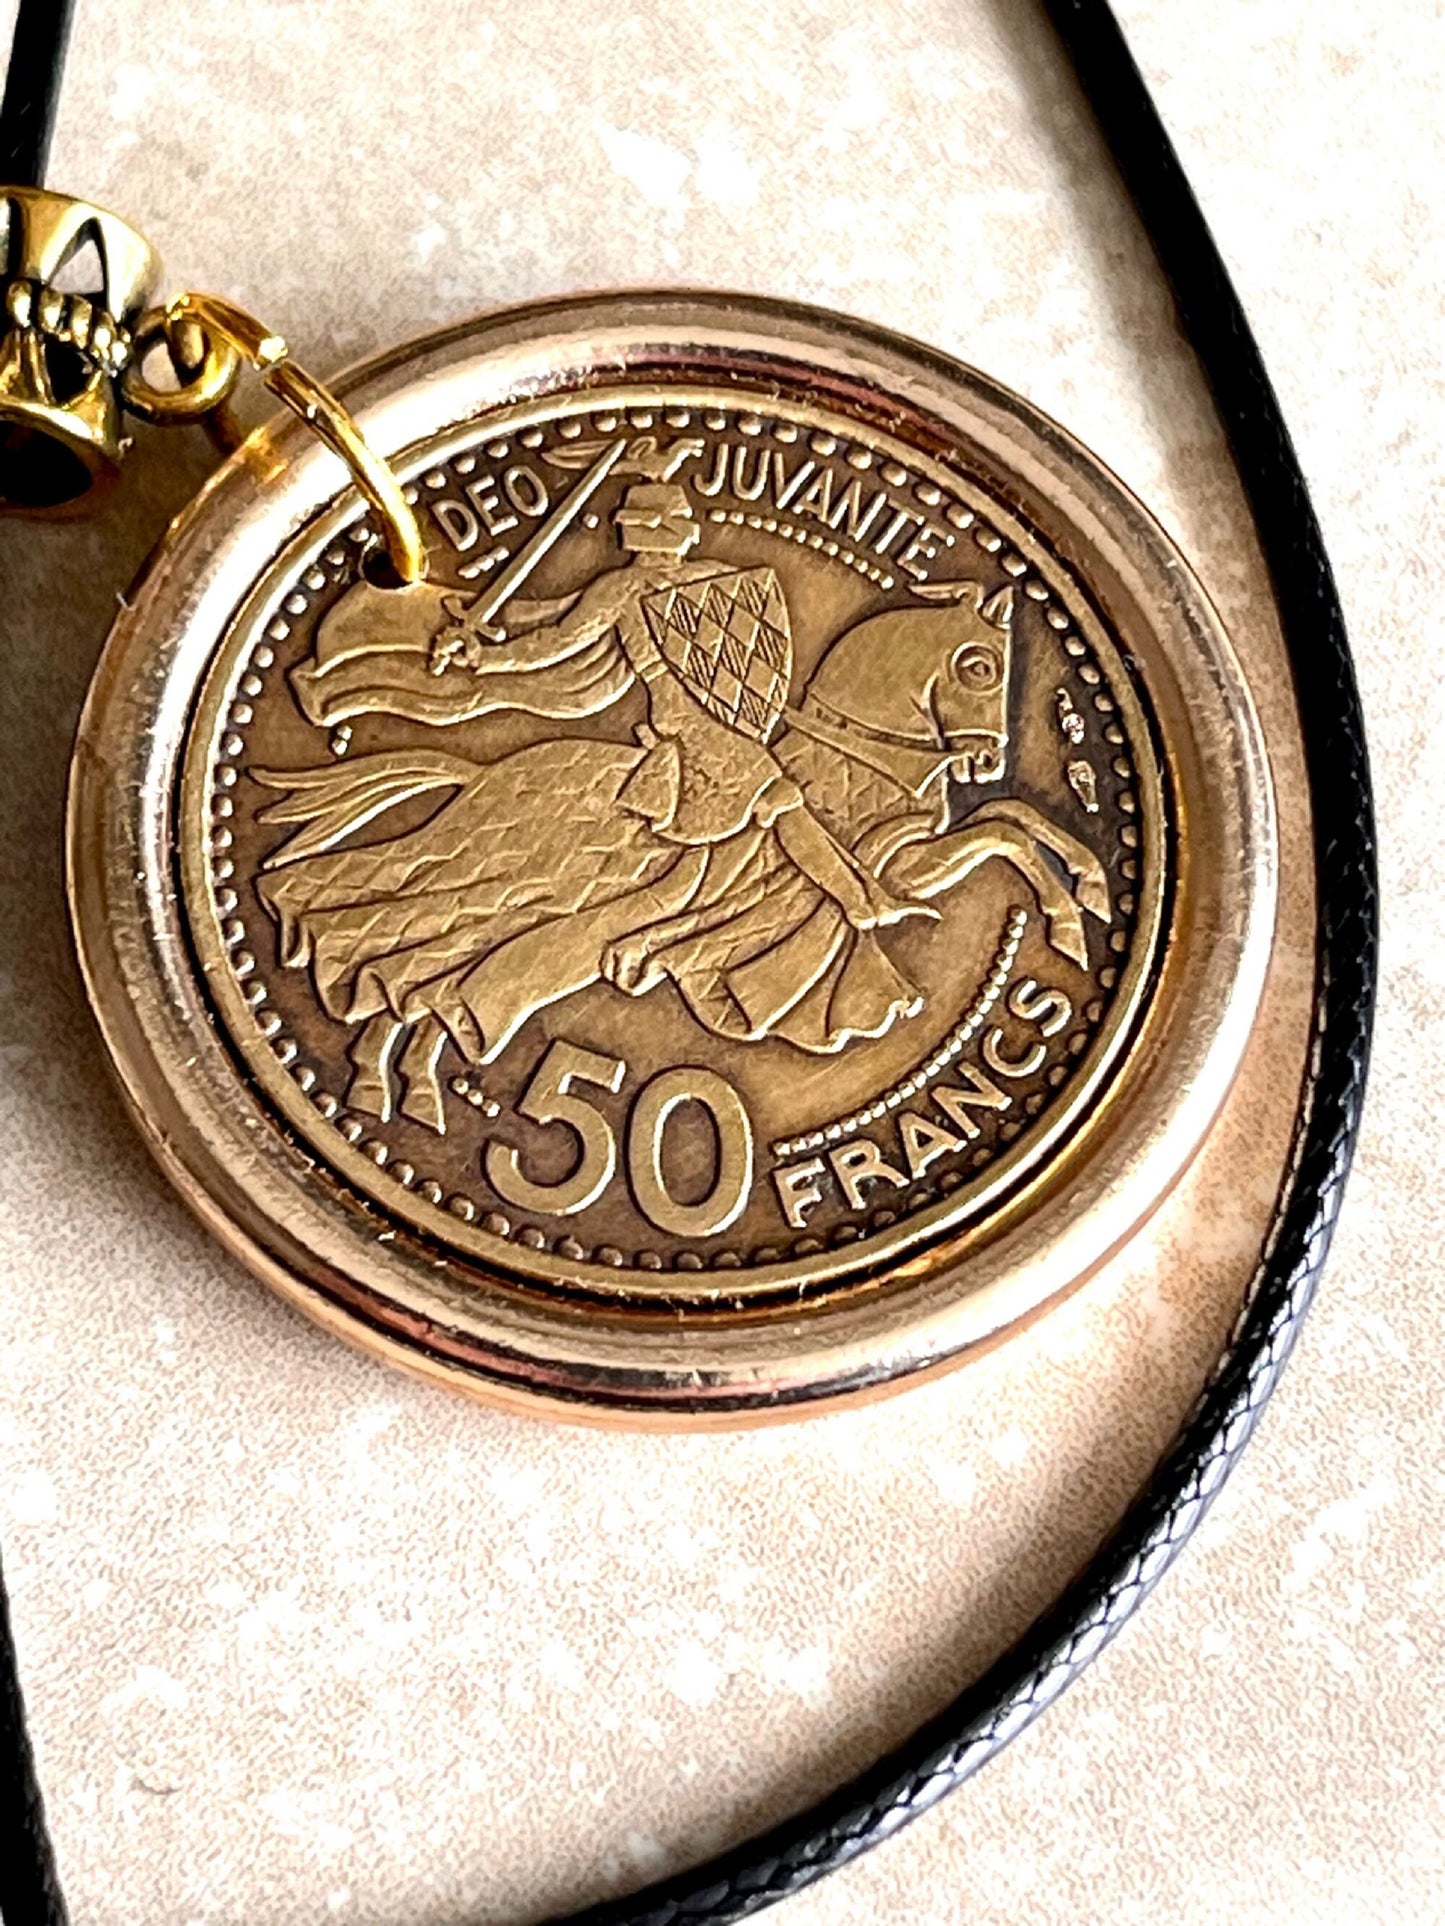 Monaco Coin Pendant Necklace 50 Francs, Prince Rainier III Personal Vintage Handmade Jewelry Gift Friend Charm Him Her World Coin Collector